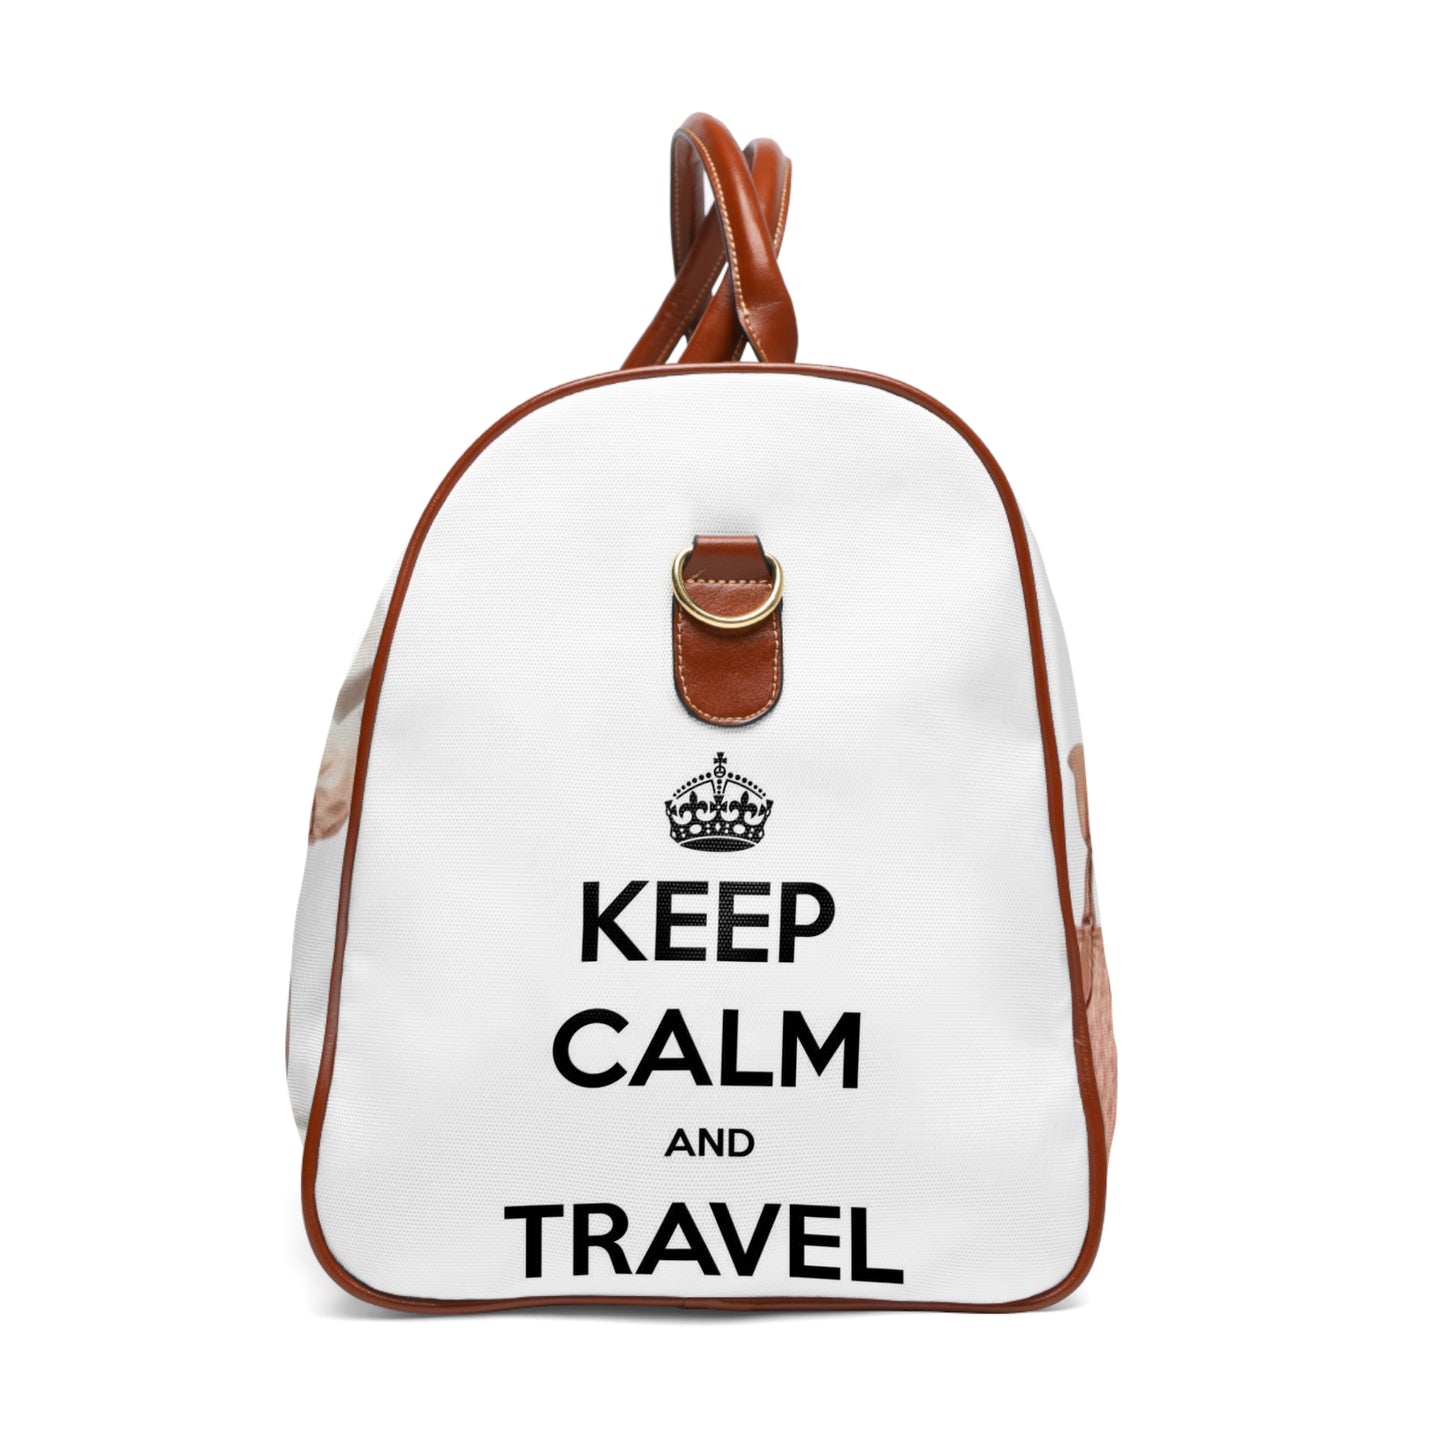 Adventure-Ready: Waterproof Travel Bag with Stylish Designs For The Adventurous Man (KEEP CALM)